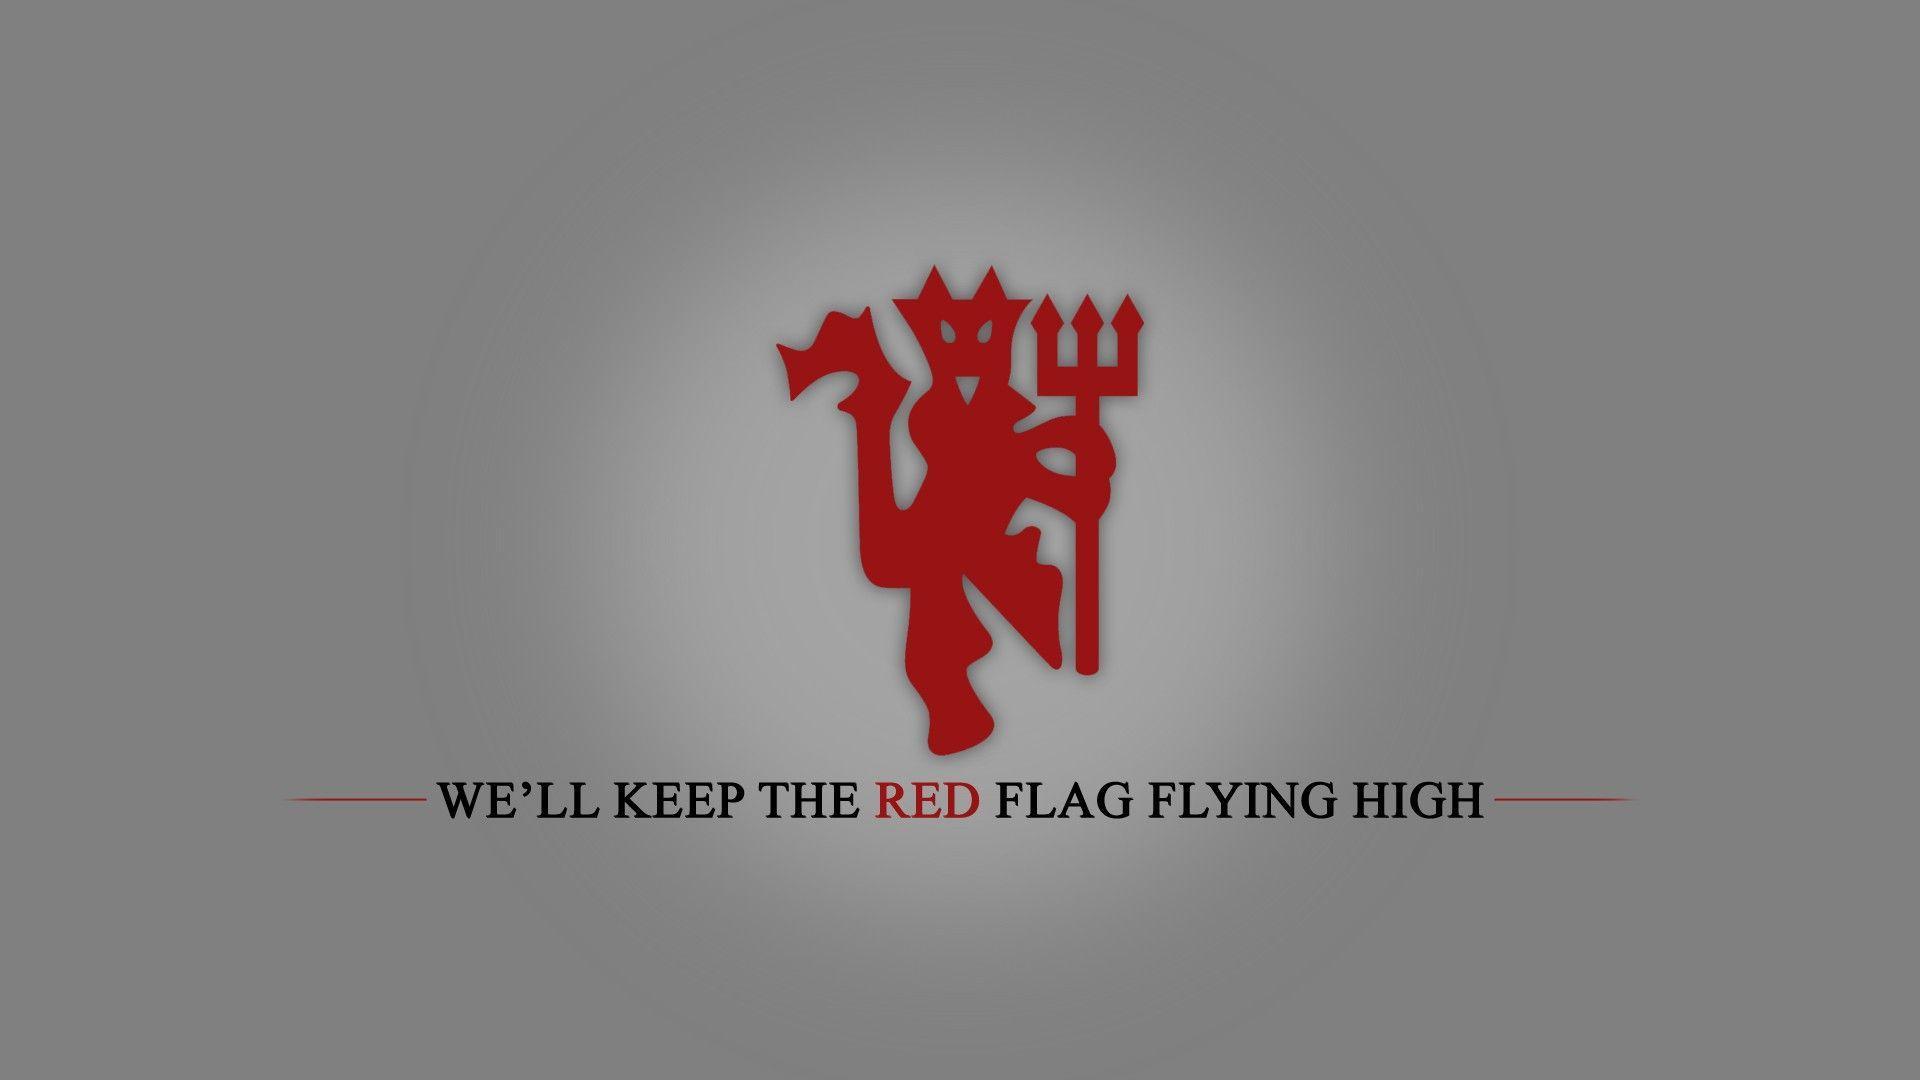 Manchester United free wallpaper high resolutions pics